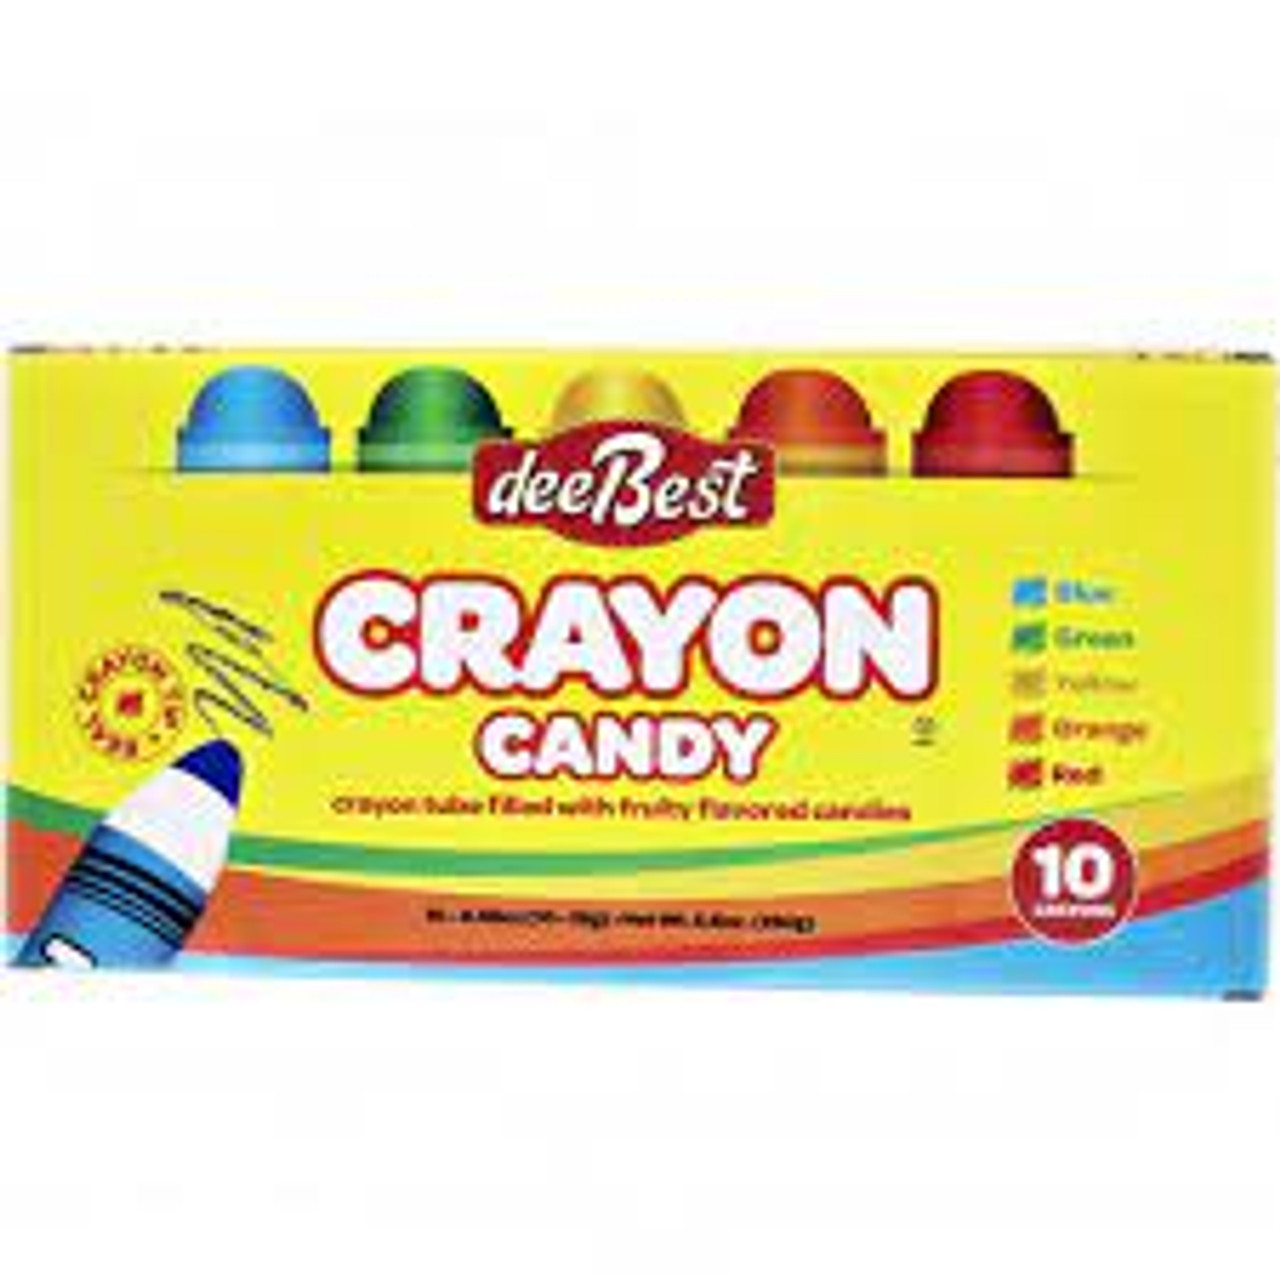 Dee Best Back To School Crayon Tube Filled with Fruity Flavored Candy - 5  Crayons : Arts, Crafts & Sewing 